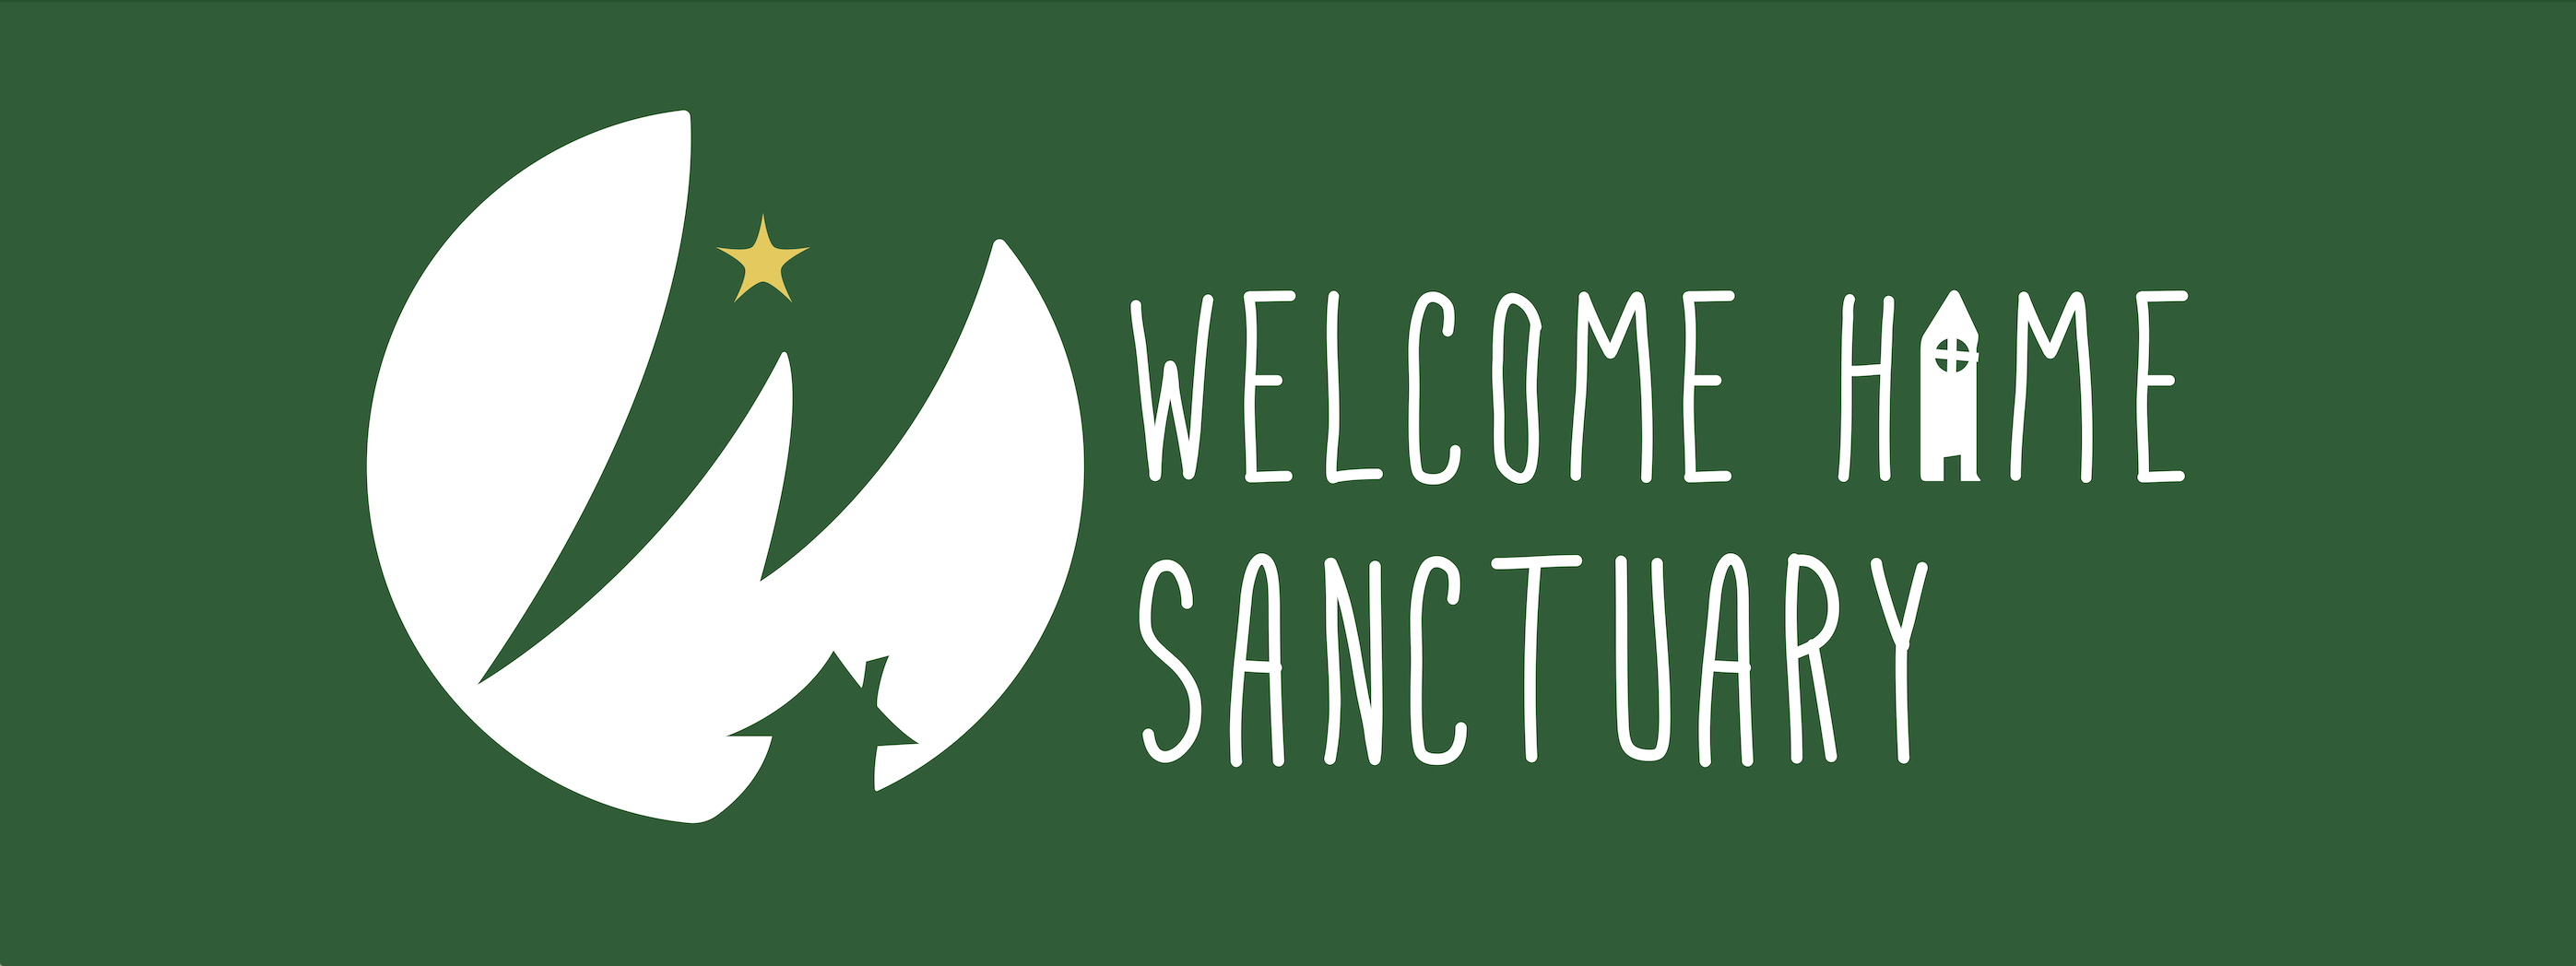 Welcome Home Sanctuary